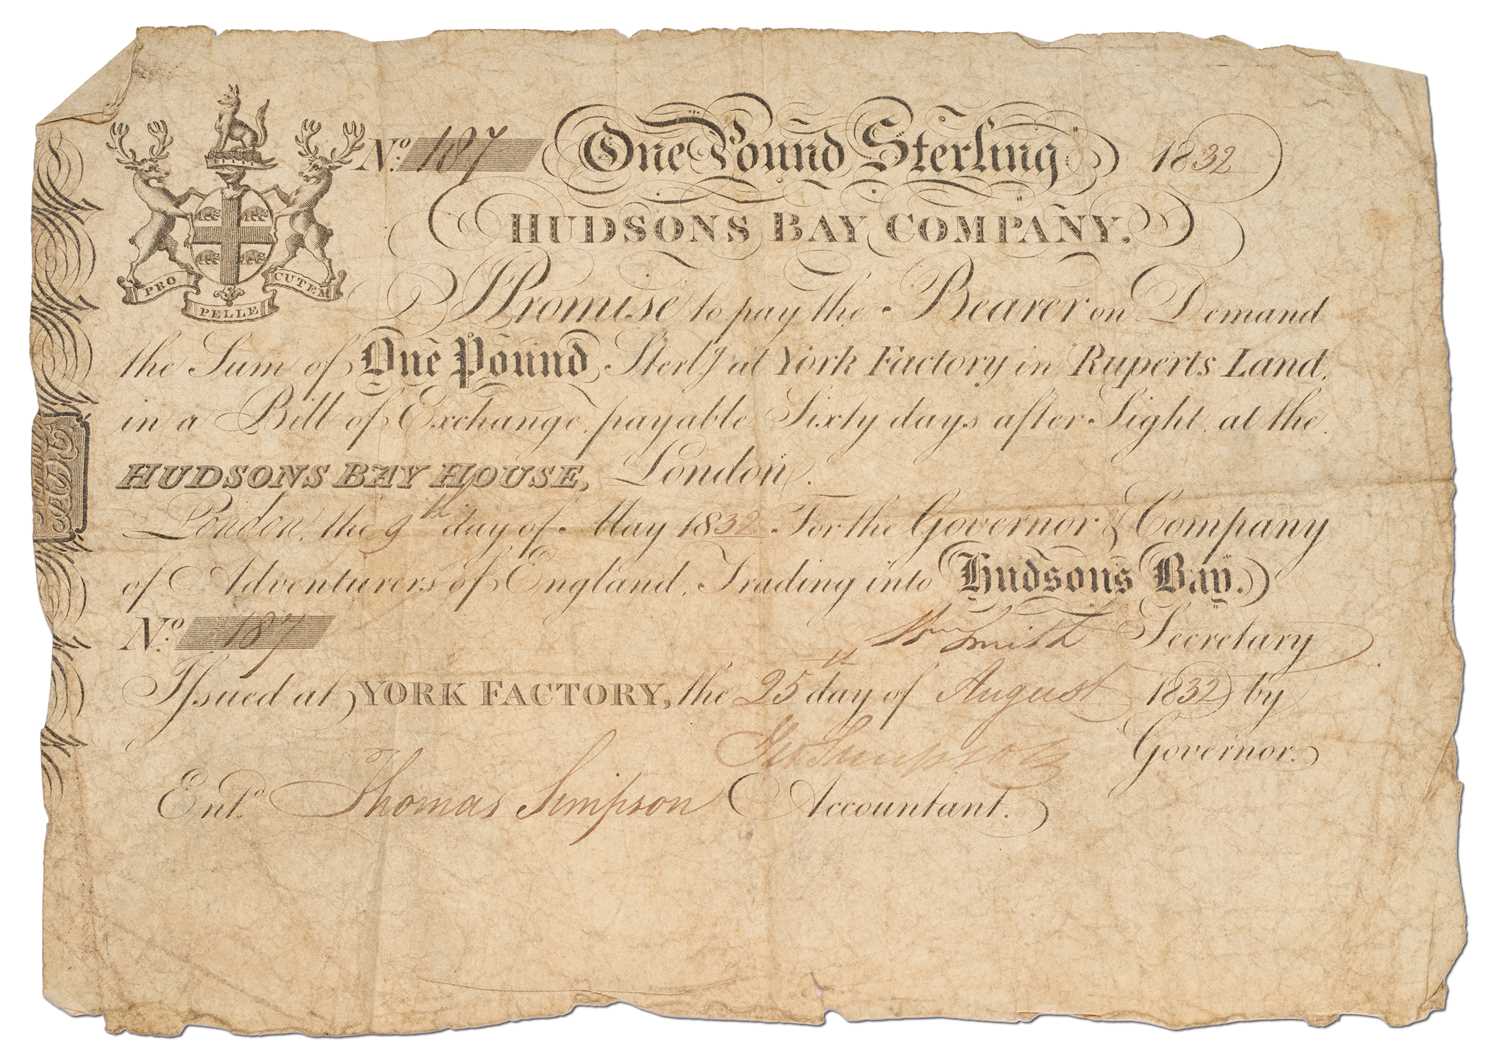 Canada, Hudson's Bay Company Promissory Note, One Pound 1832, serial no. 187 signed in London on 9th